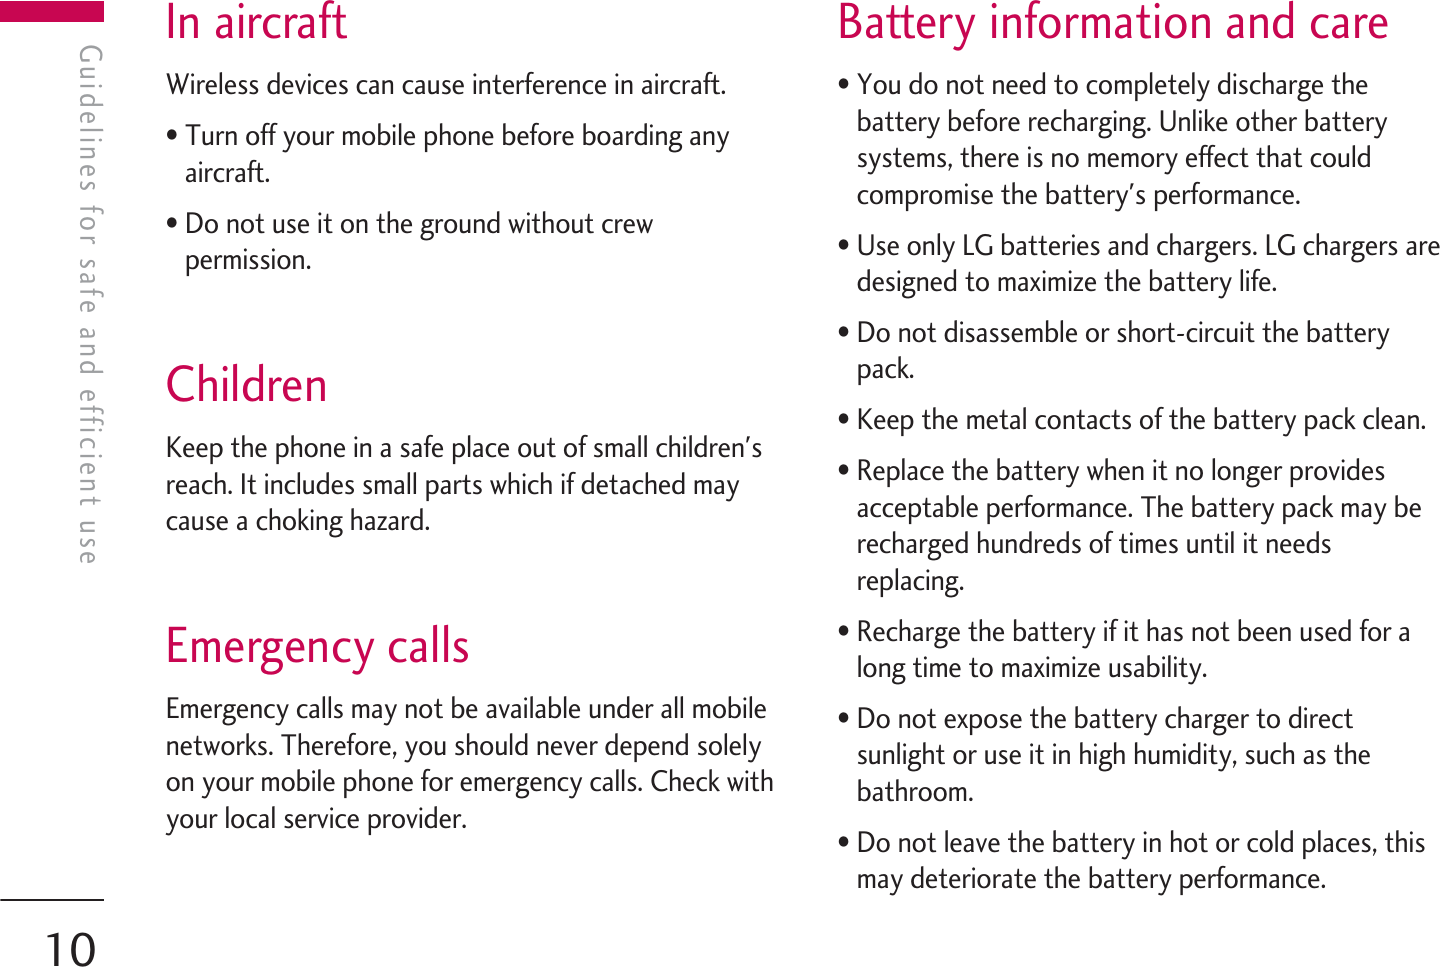 In aircraftWireless devices can cause interference in aircraft.• Turn off your mobile phone before boarding anyaircraft.• Do not use it on the ground without crewpermission.ChildrenKeep the phone in a safe place out of small children&apos;sreach. It includes small parts which if detached maycause a choking hazard.Emergency callsEmergency calls may not be available under all mobilenetworks. Therefore, you should never depend solelyon your mobile phone for emergency calls. Check withyour local service provider.Battery information and care• You do not need to completely discharge thebattery before recharging. Unlike other batterysystems, there is no memory effect that couldcompromise the battery&apos;s performance.• Use only LG batteries and chargers. LG chargers aredesigned to maximize the battery life.• Do not disassemble or short-circuit the batterypack.• Keep the metal contacts of the battery pack clean.• Replace the battery when it no longer providesacceptable performance. The battery pack may berecharged hundreds of times until it needsreplacing.• Recharge the battery if it has not been used for along time to maximize usability.• Do not expose the battery charger to directsunlight or use it in high humidity, such as thebathroom.• Do not leave the battery in hot or cold places, thismay deteriorate the battery performance.Guidelines for safe and efficient useGuidelines for safe and efficient use10